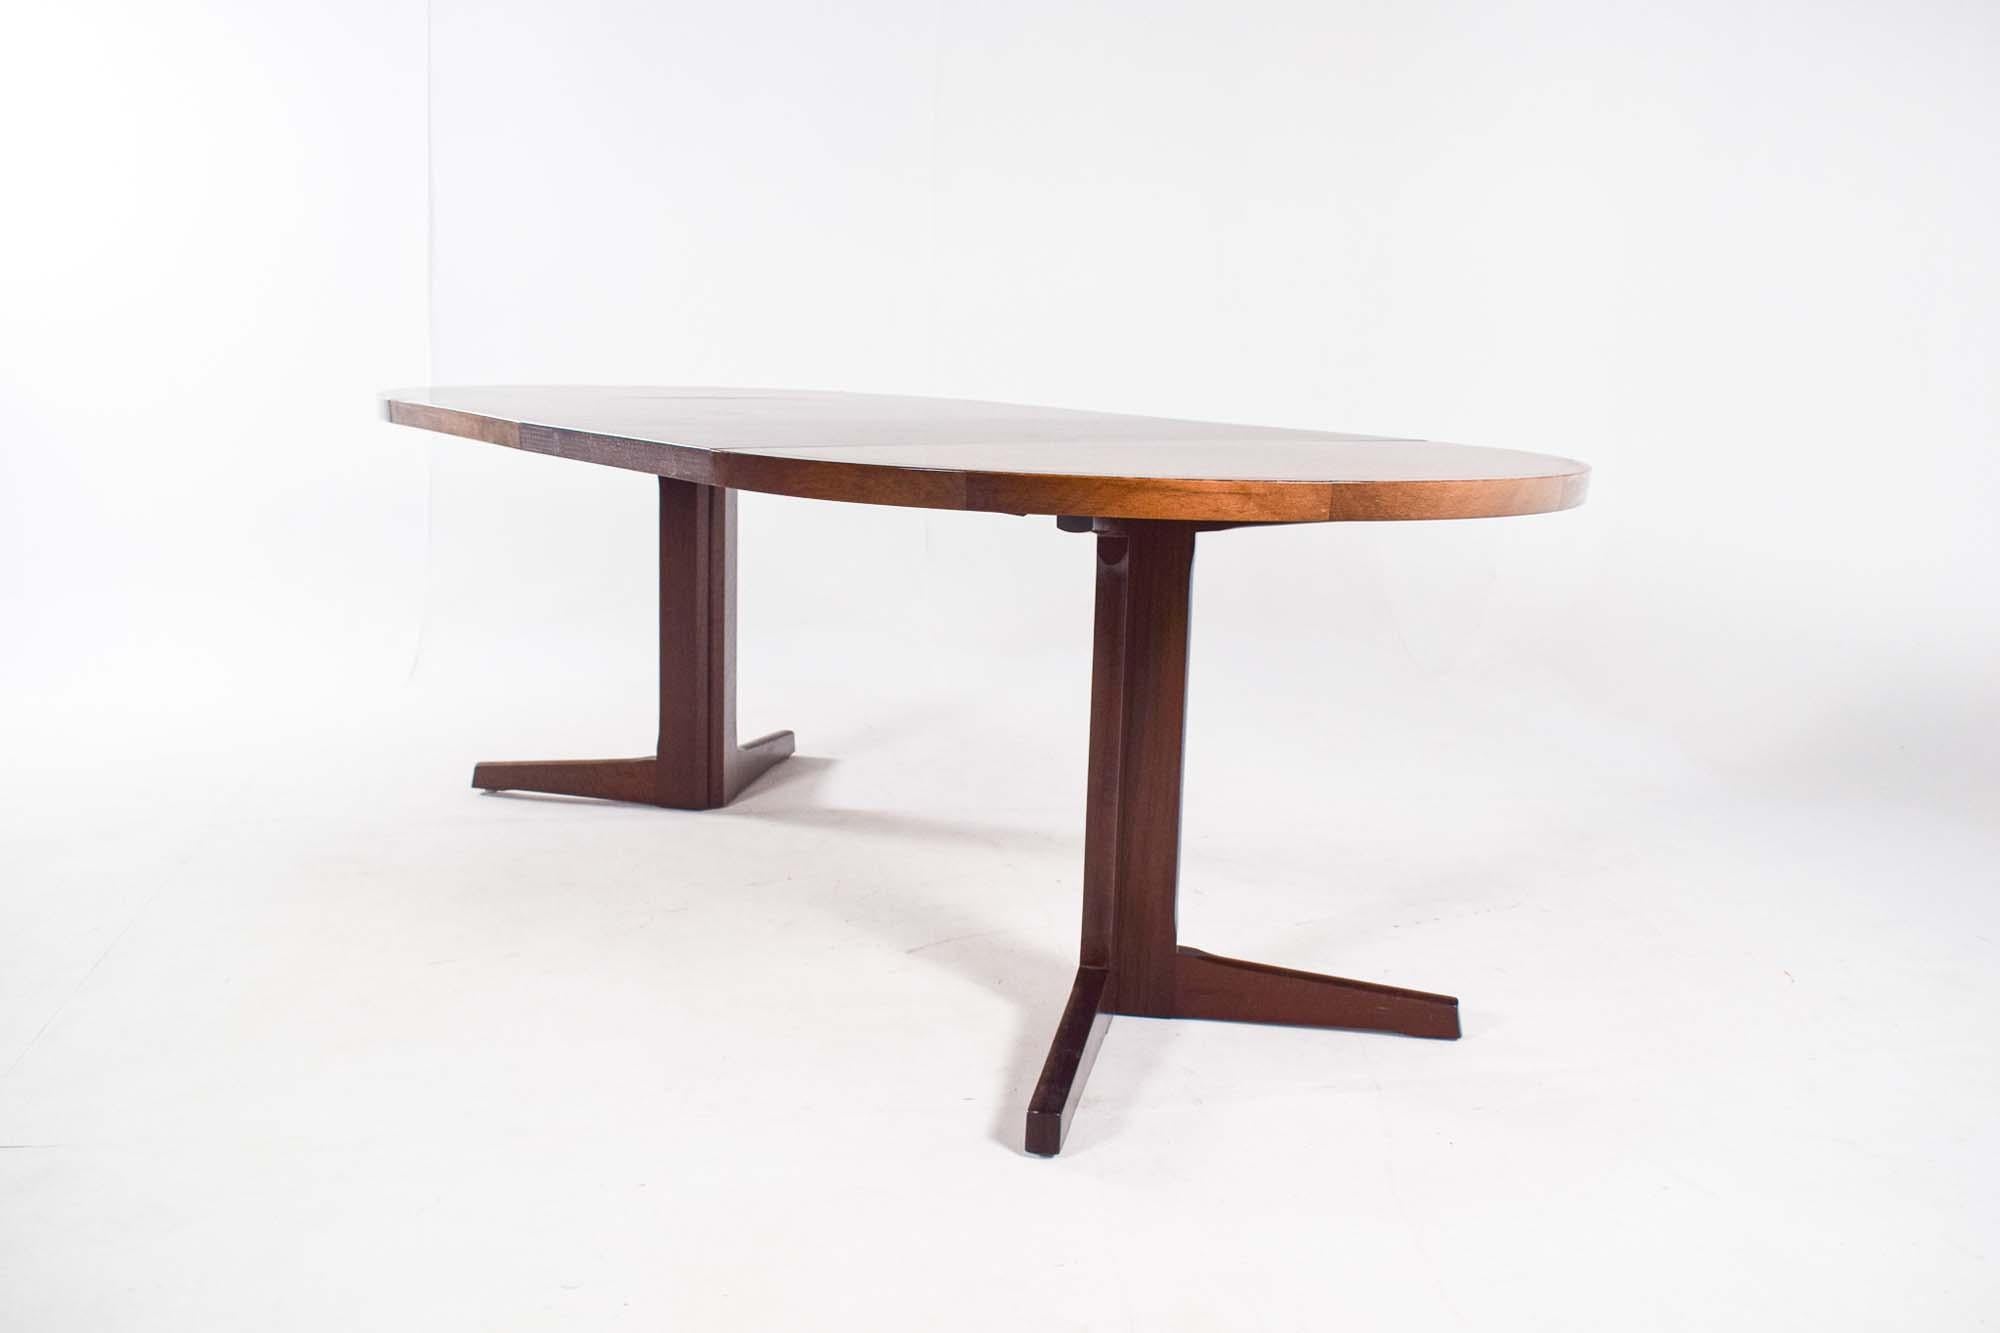 A beautiful ‘pedestal’ dining table with two leaves of 55 cm each. classic extendable dining table from the 1960s. Solid rosewood frame and table top in rosewood veneer. The table is supported by a cruciform pedestal base that comes apart whem table